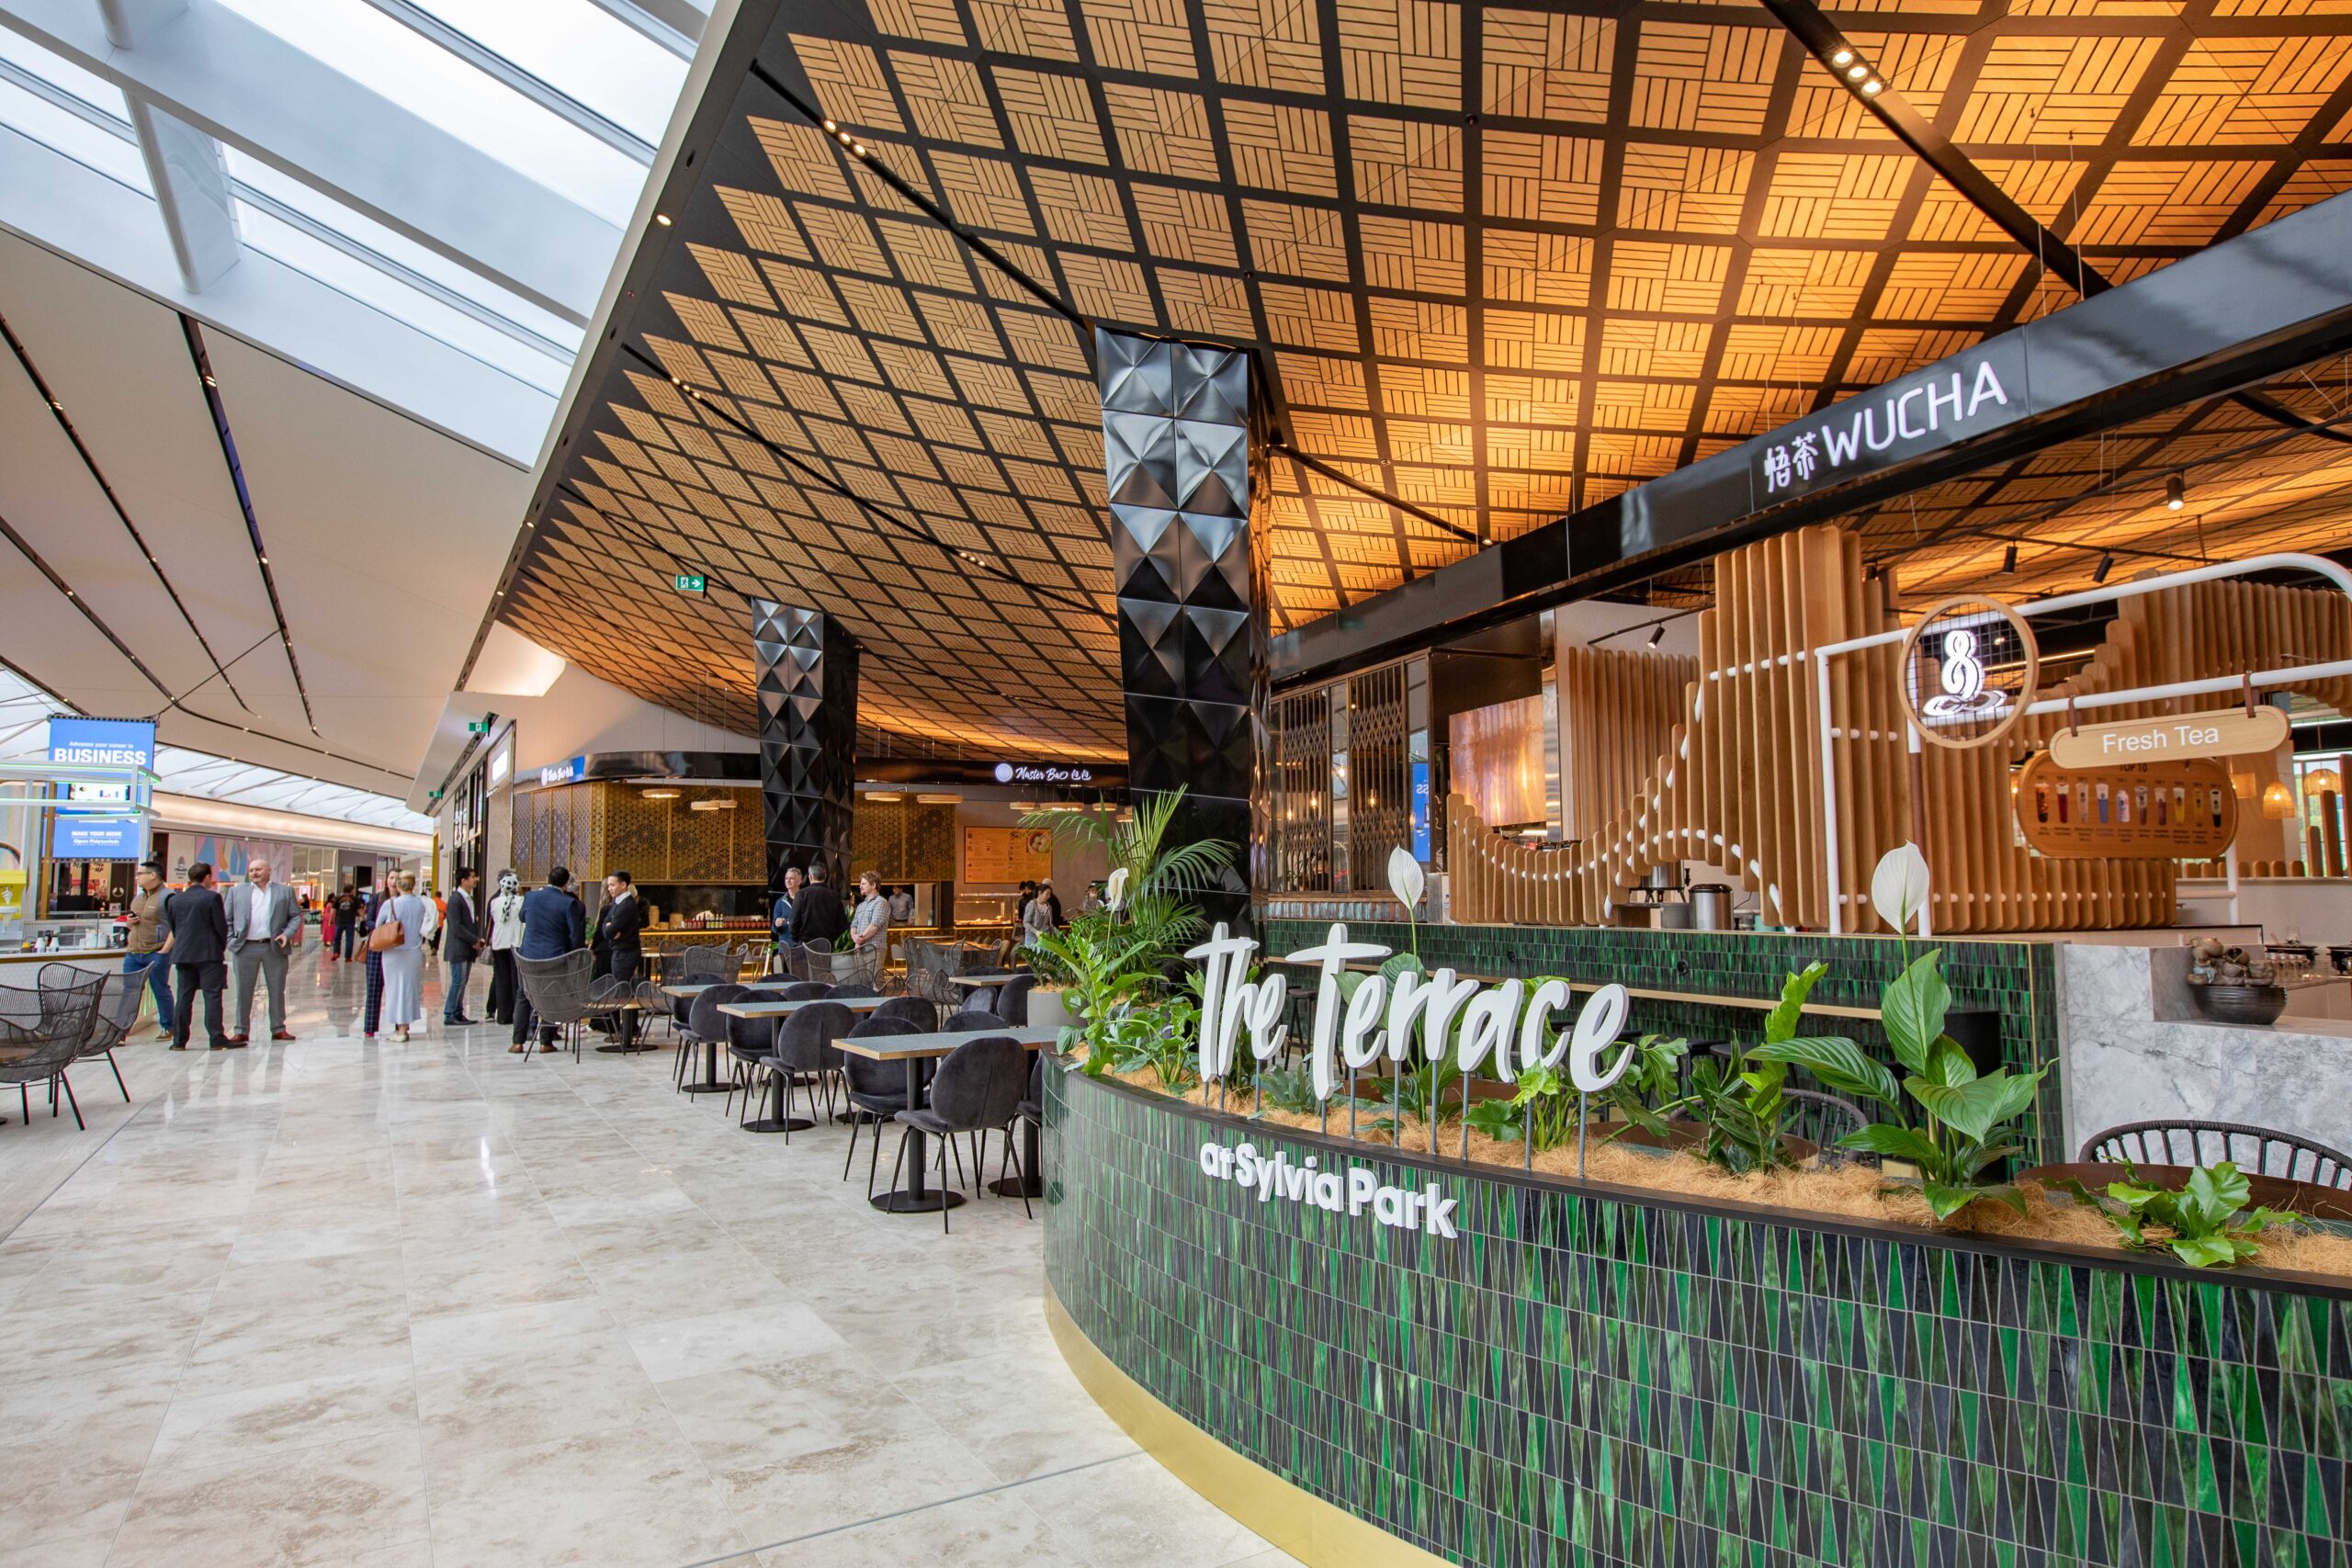 The Terrace at Sylvia Park – what’s on offer at this new dining destination